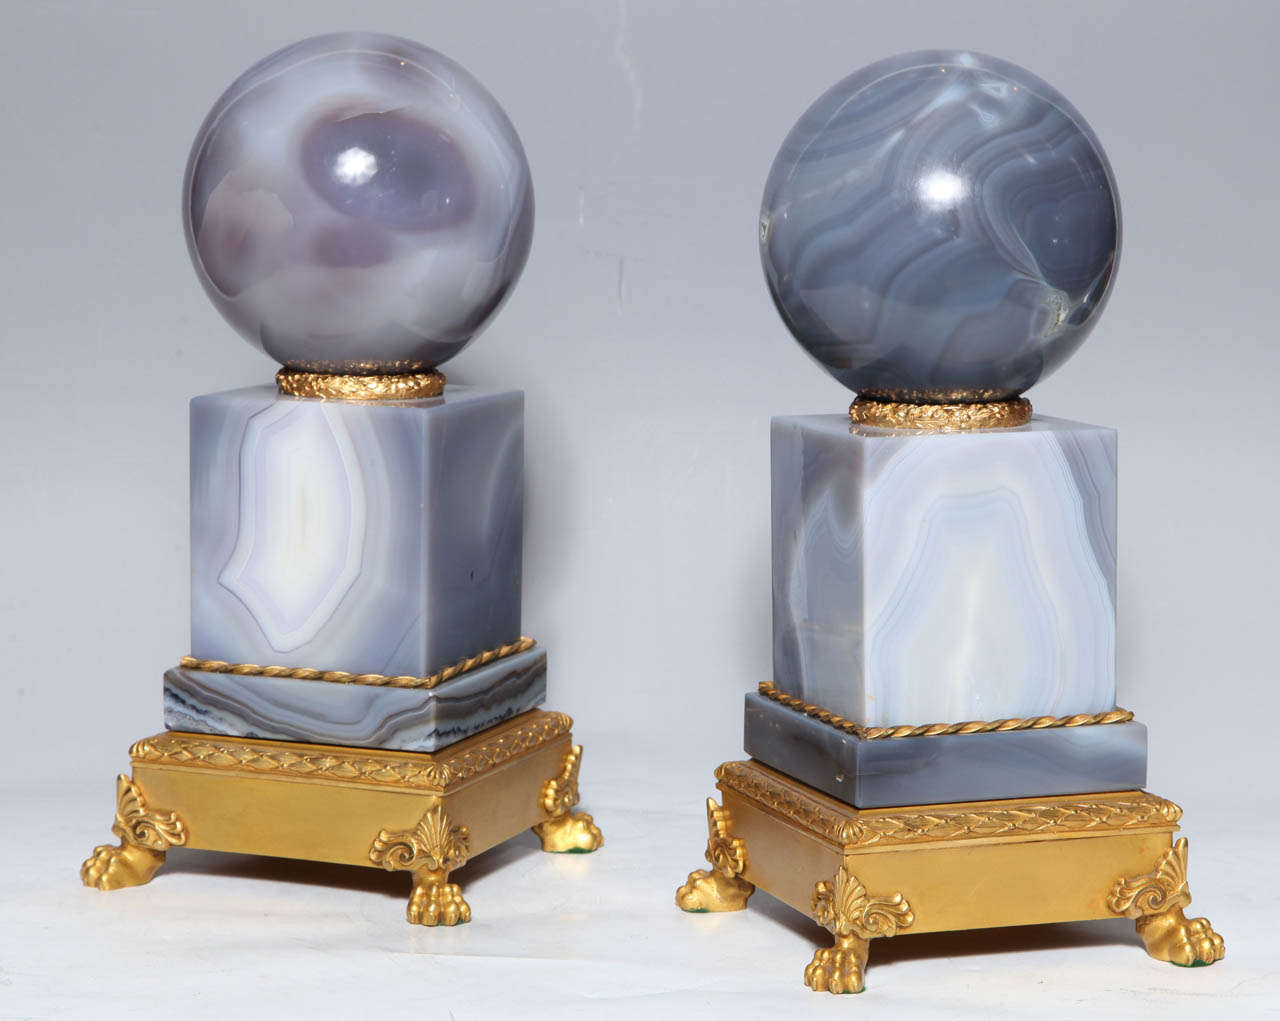 This pair of second empire style agate orbs on plinths have lions claw feet of gilt bronze with mounts of typical neoclassic derivation while the natural markings of polished grey agate give a sense of movement and elegance to these decorative